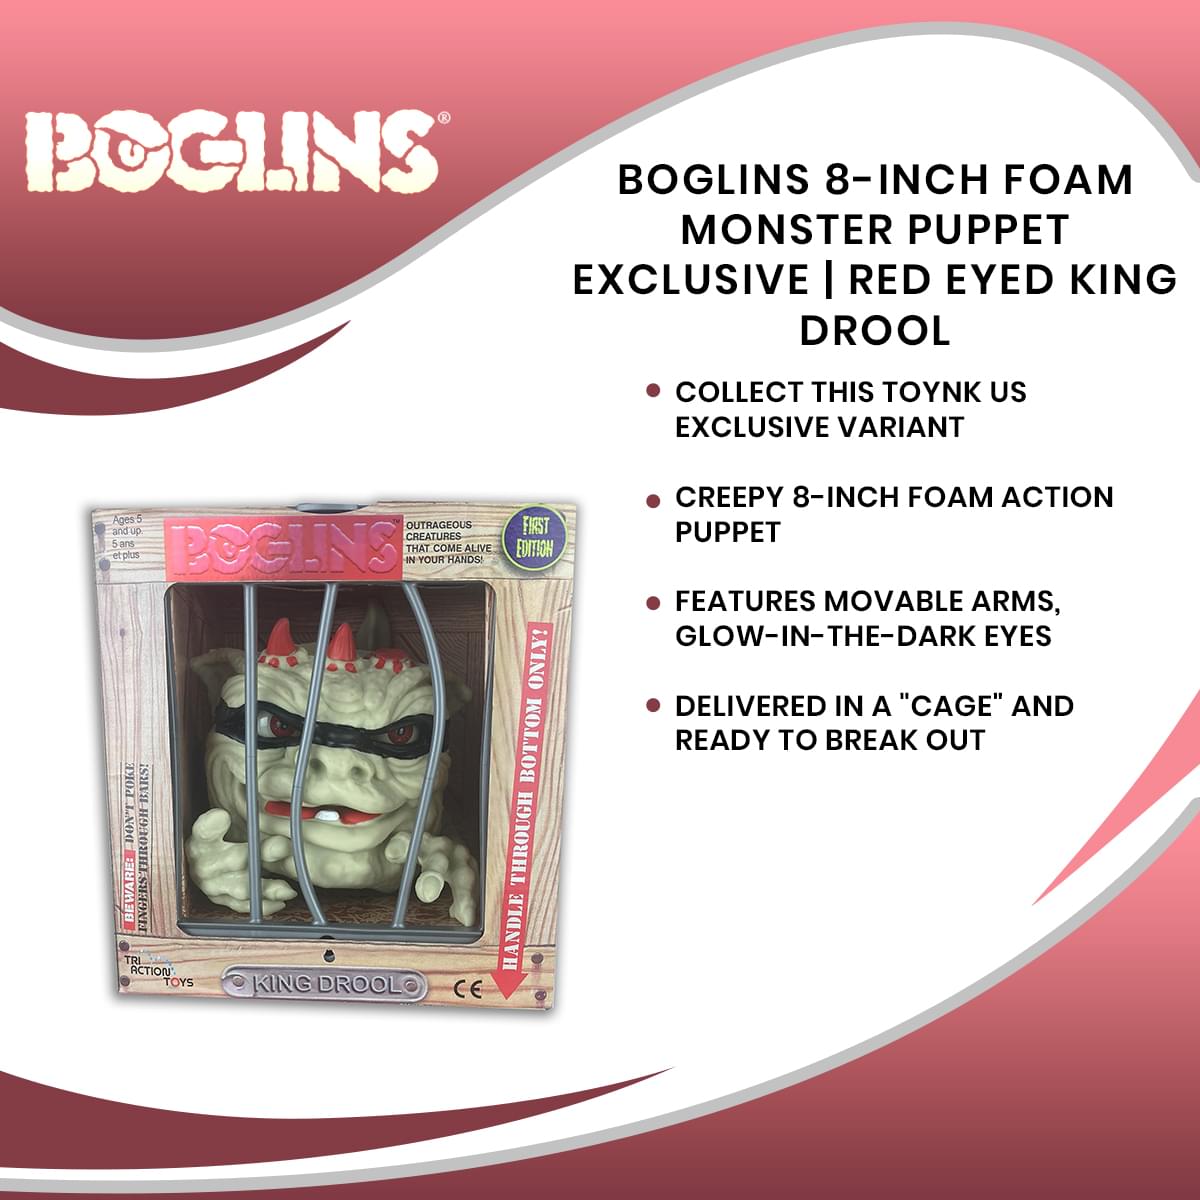 Boglins 8-Inch Foam Monster Puppet Exclusive | Red Eyed King Drool